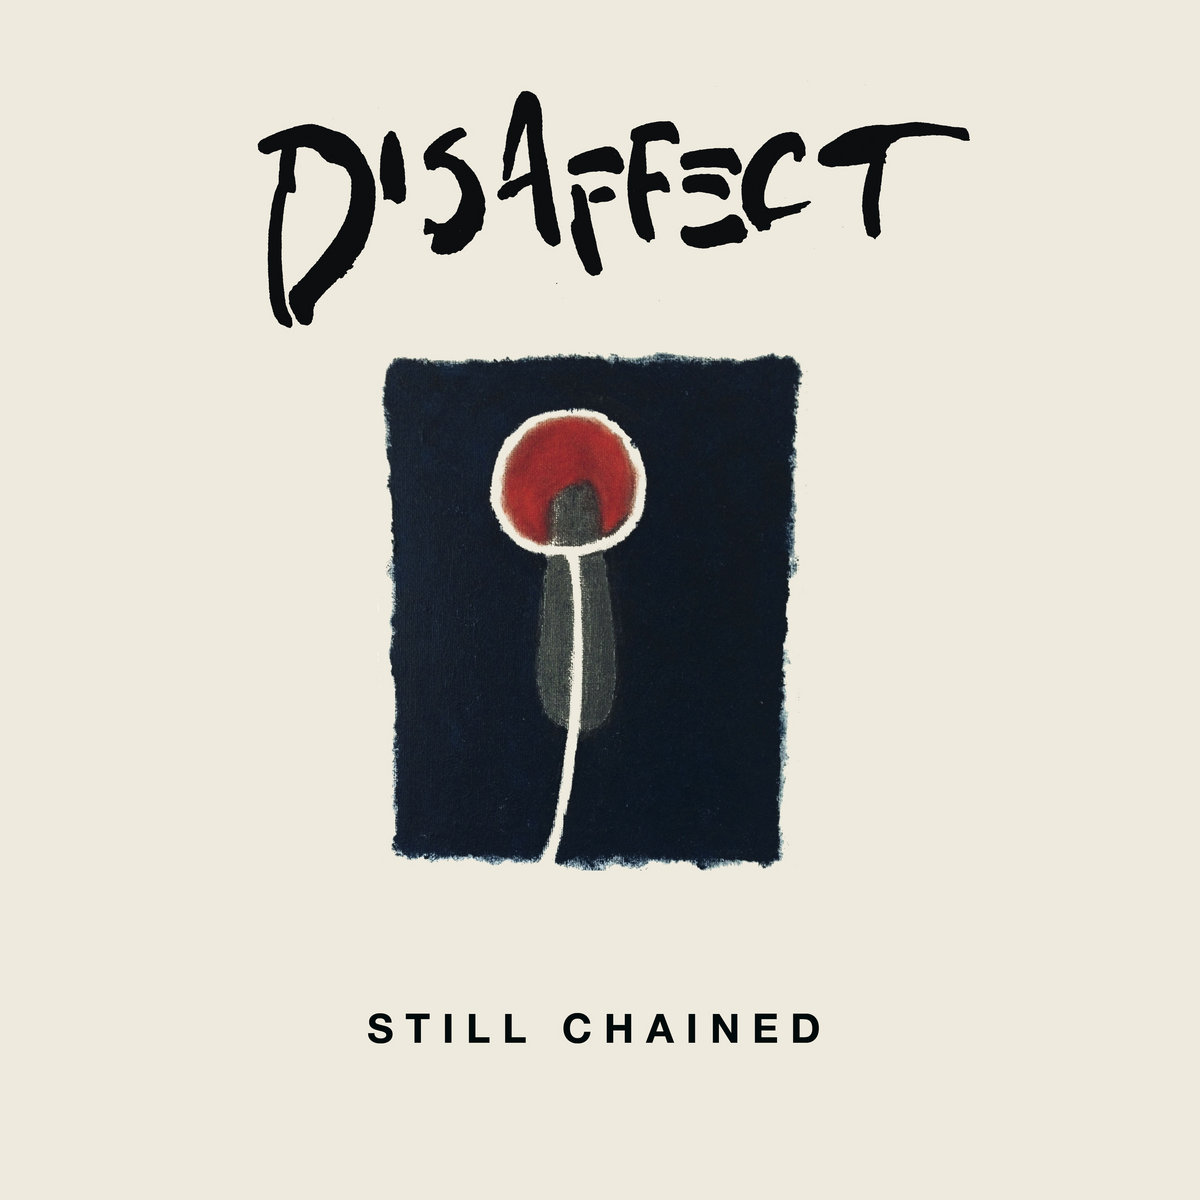 DISAFFECT - Still chained